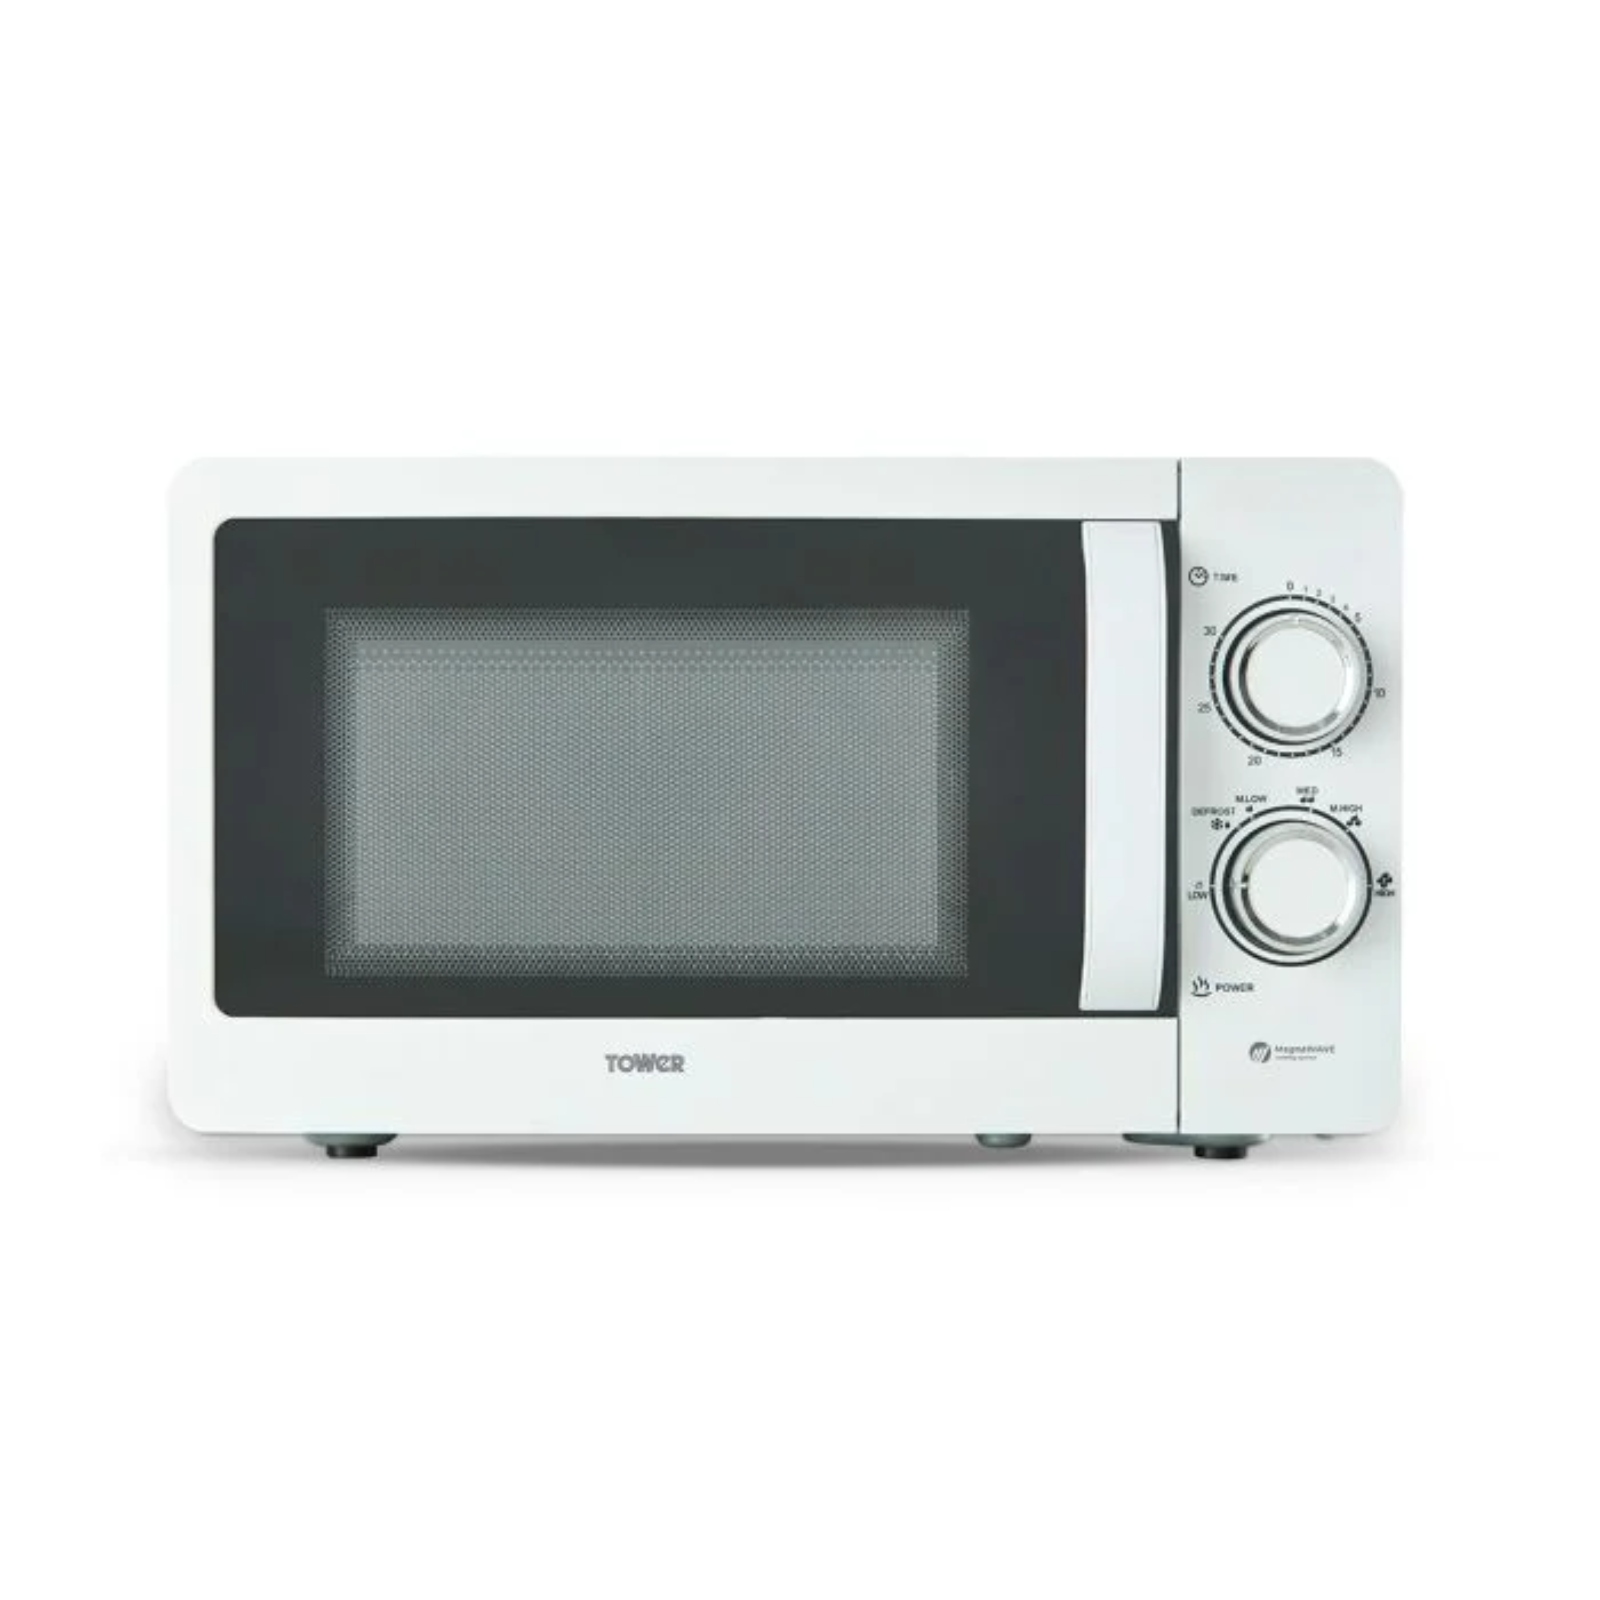 Tower Magnawave 20 Litre 800W Manual Microwave White